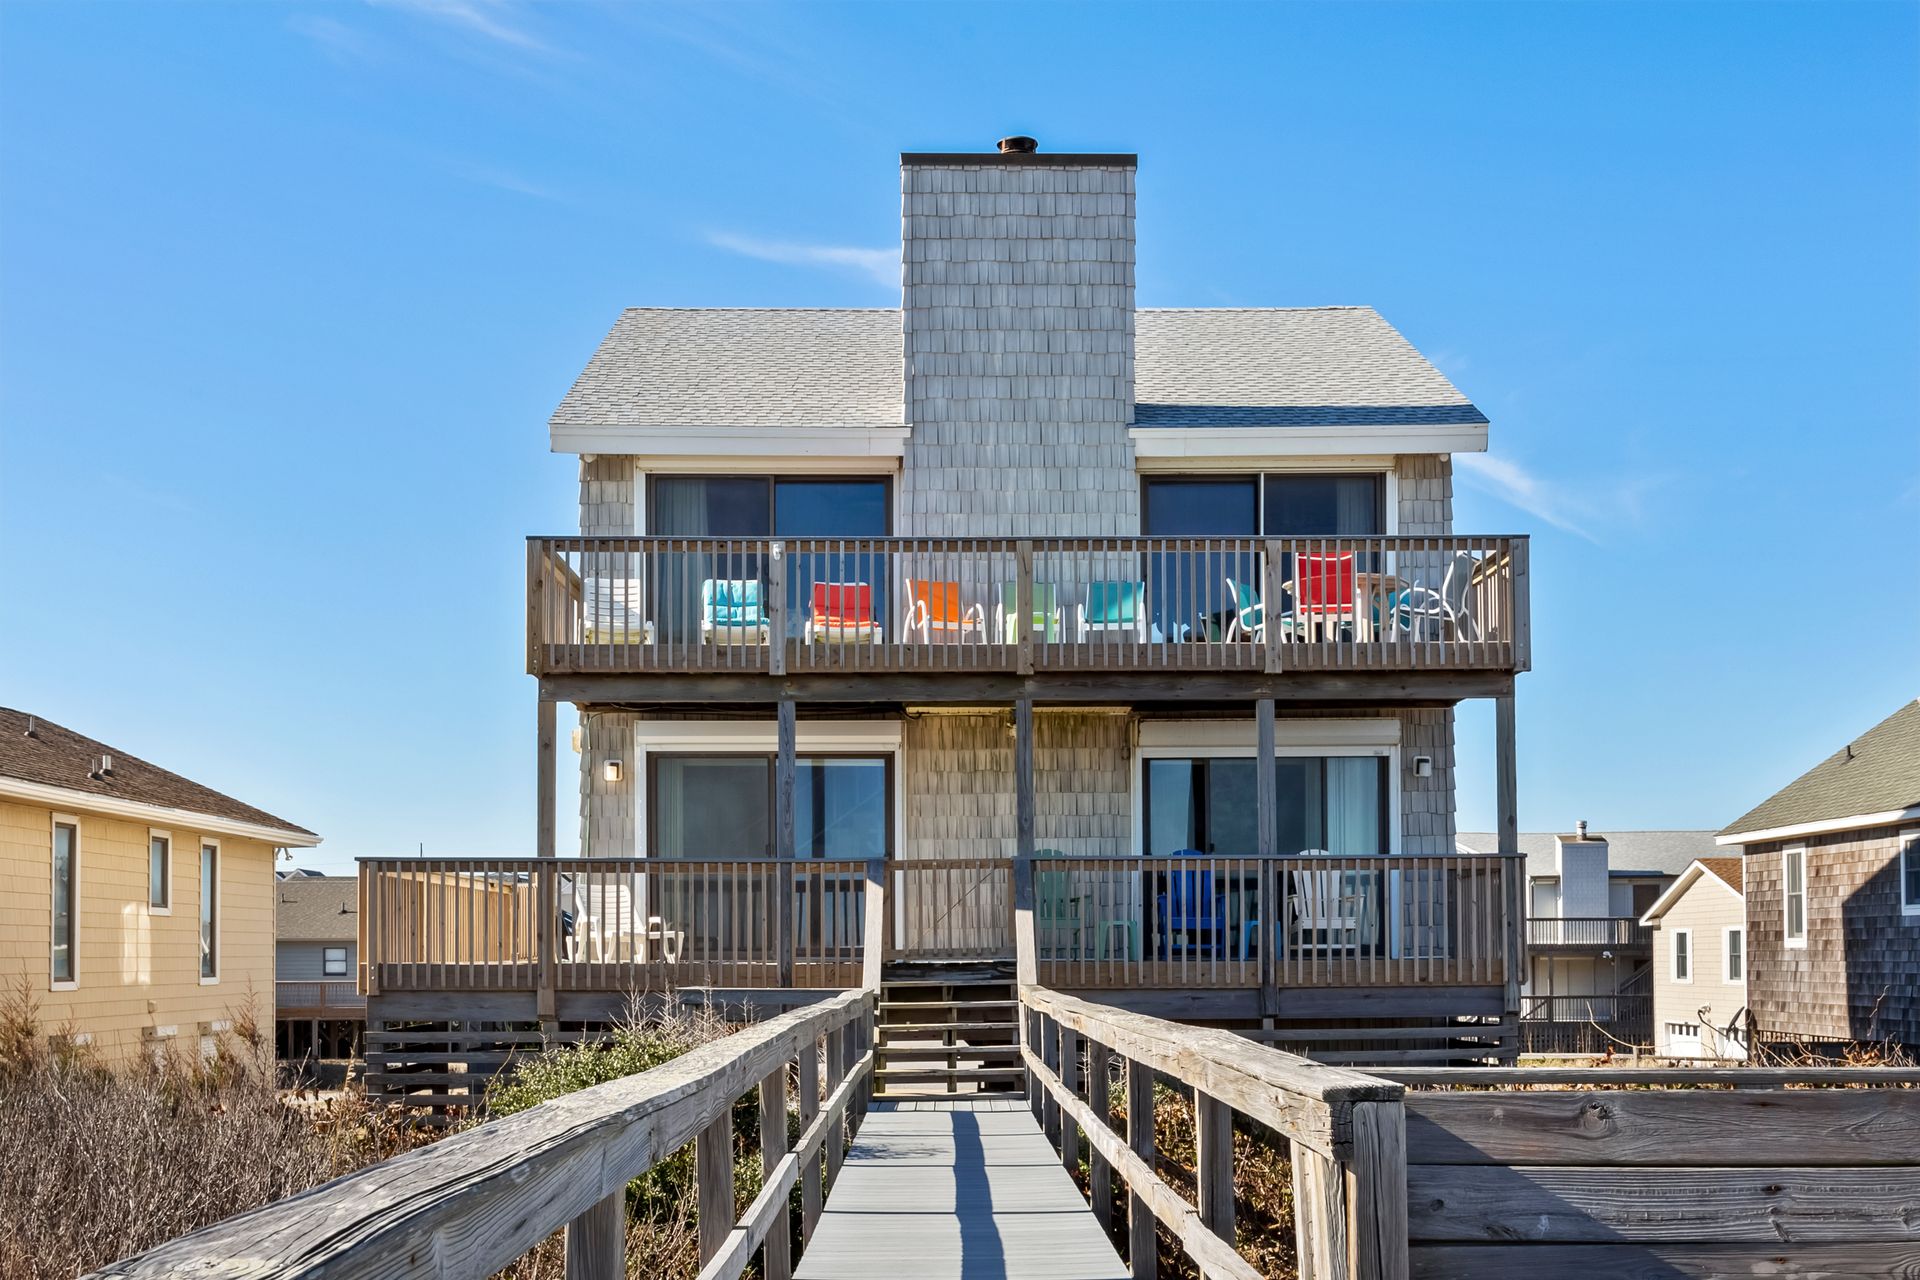 Back exterior of this classic beach front home